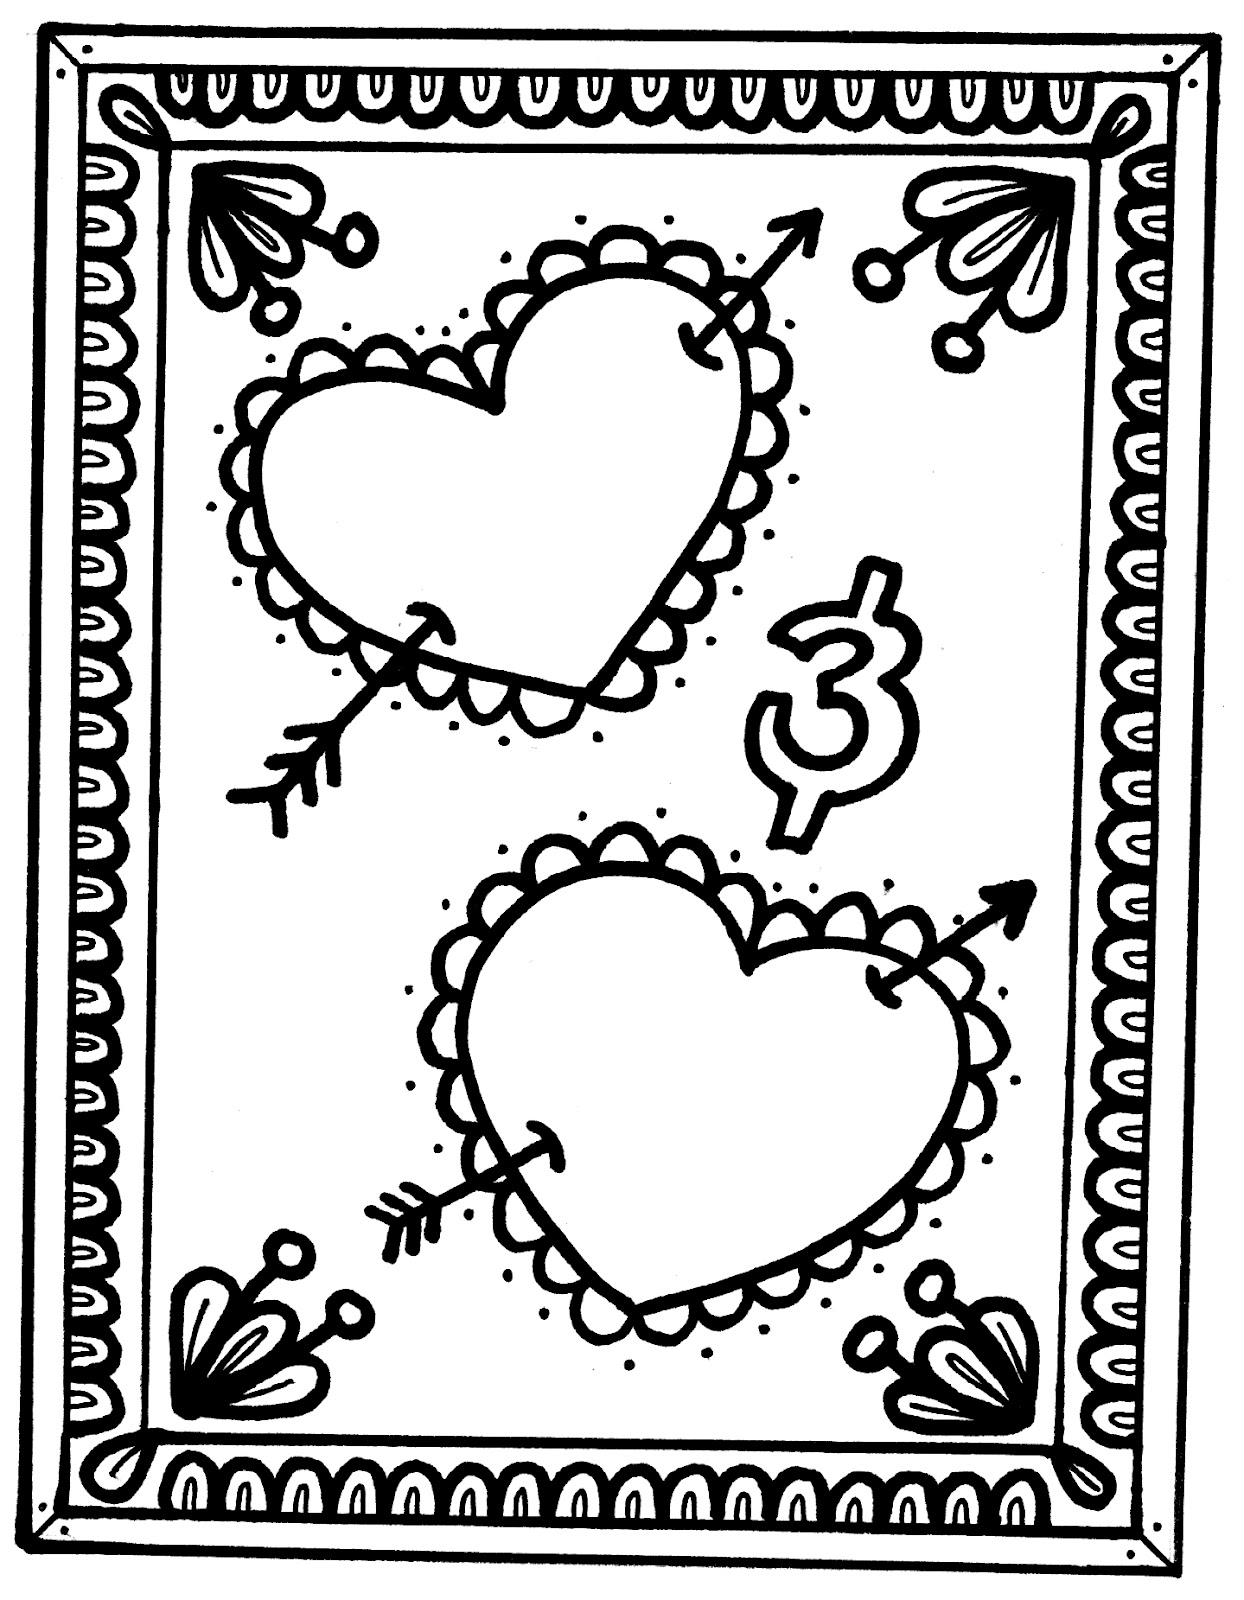 Valentine Day Coloring Pages